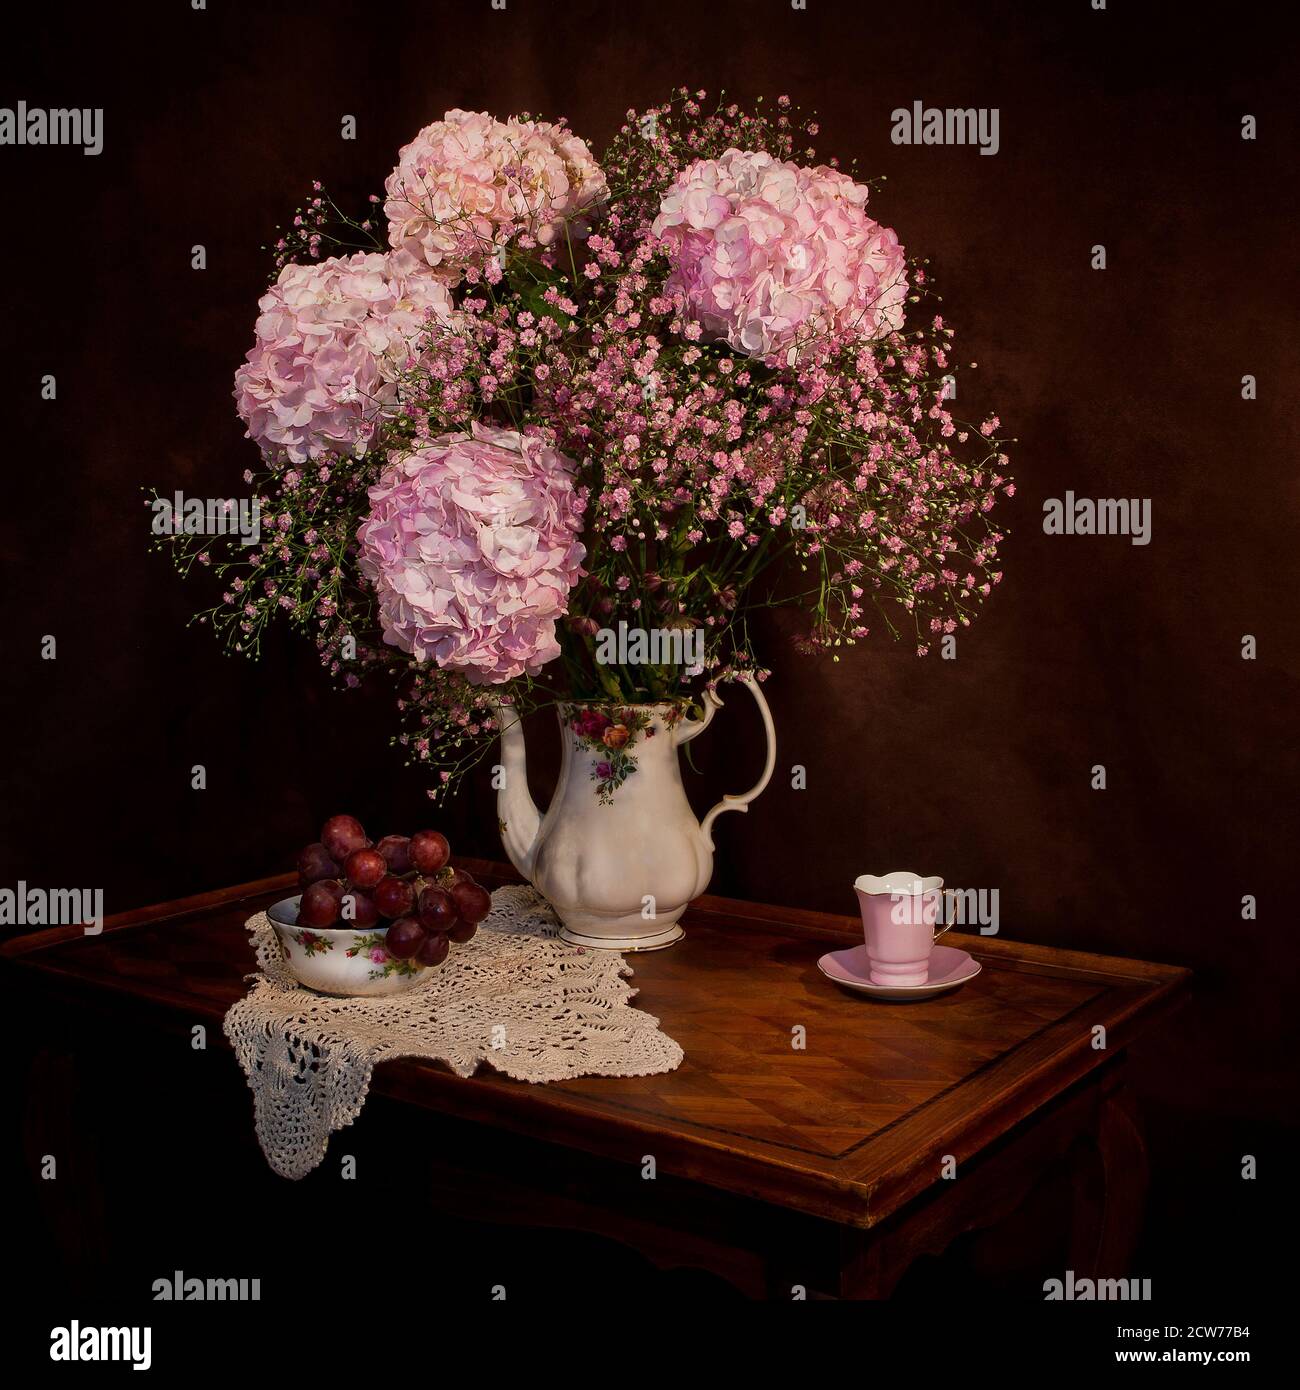 still life study with pink hydrangeas and grapes Stock Photo